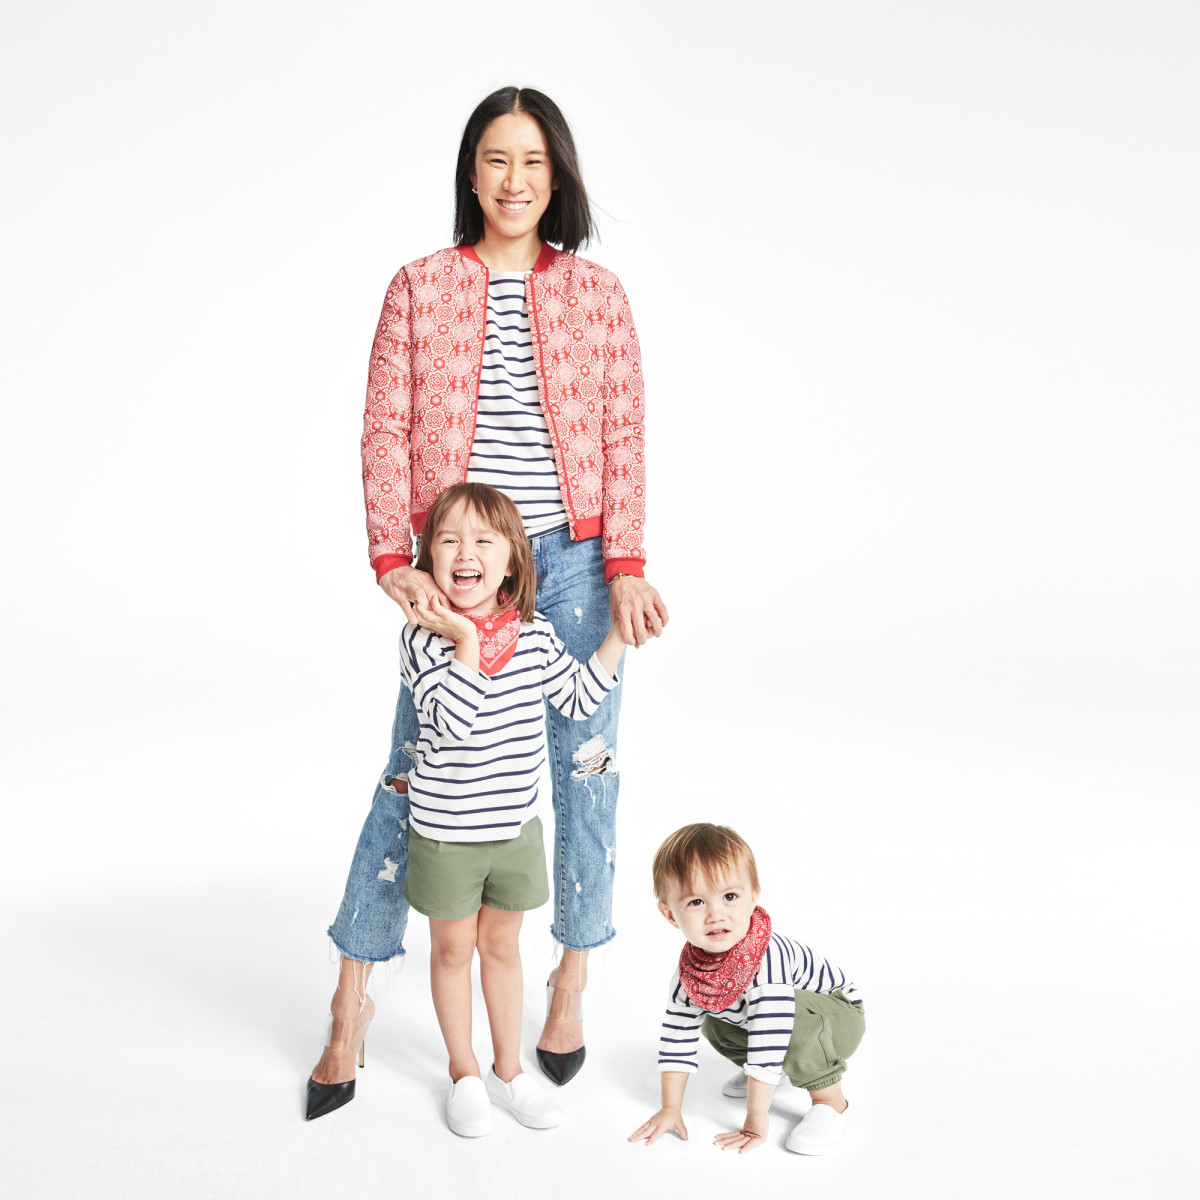 Eva Chen with her children Ren and Tao in her collection for Janie & Jack. Photo: Courtesy of Janie & Jack